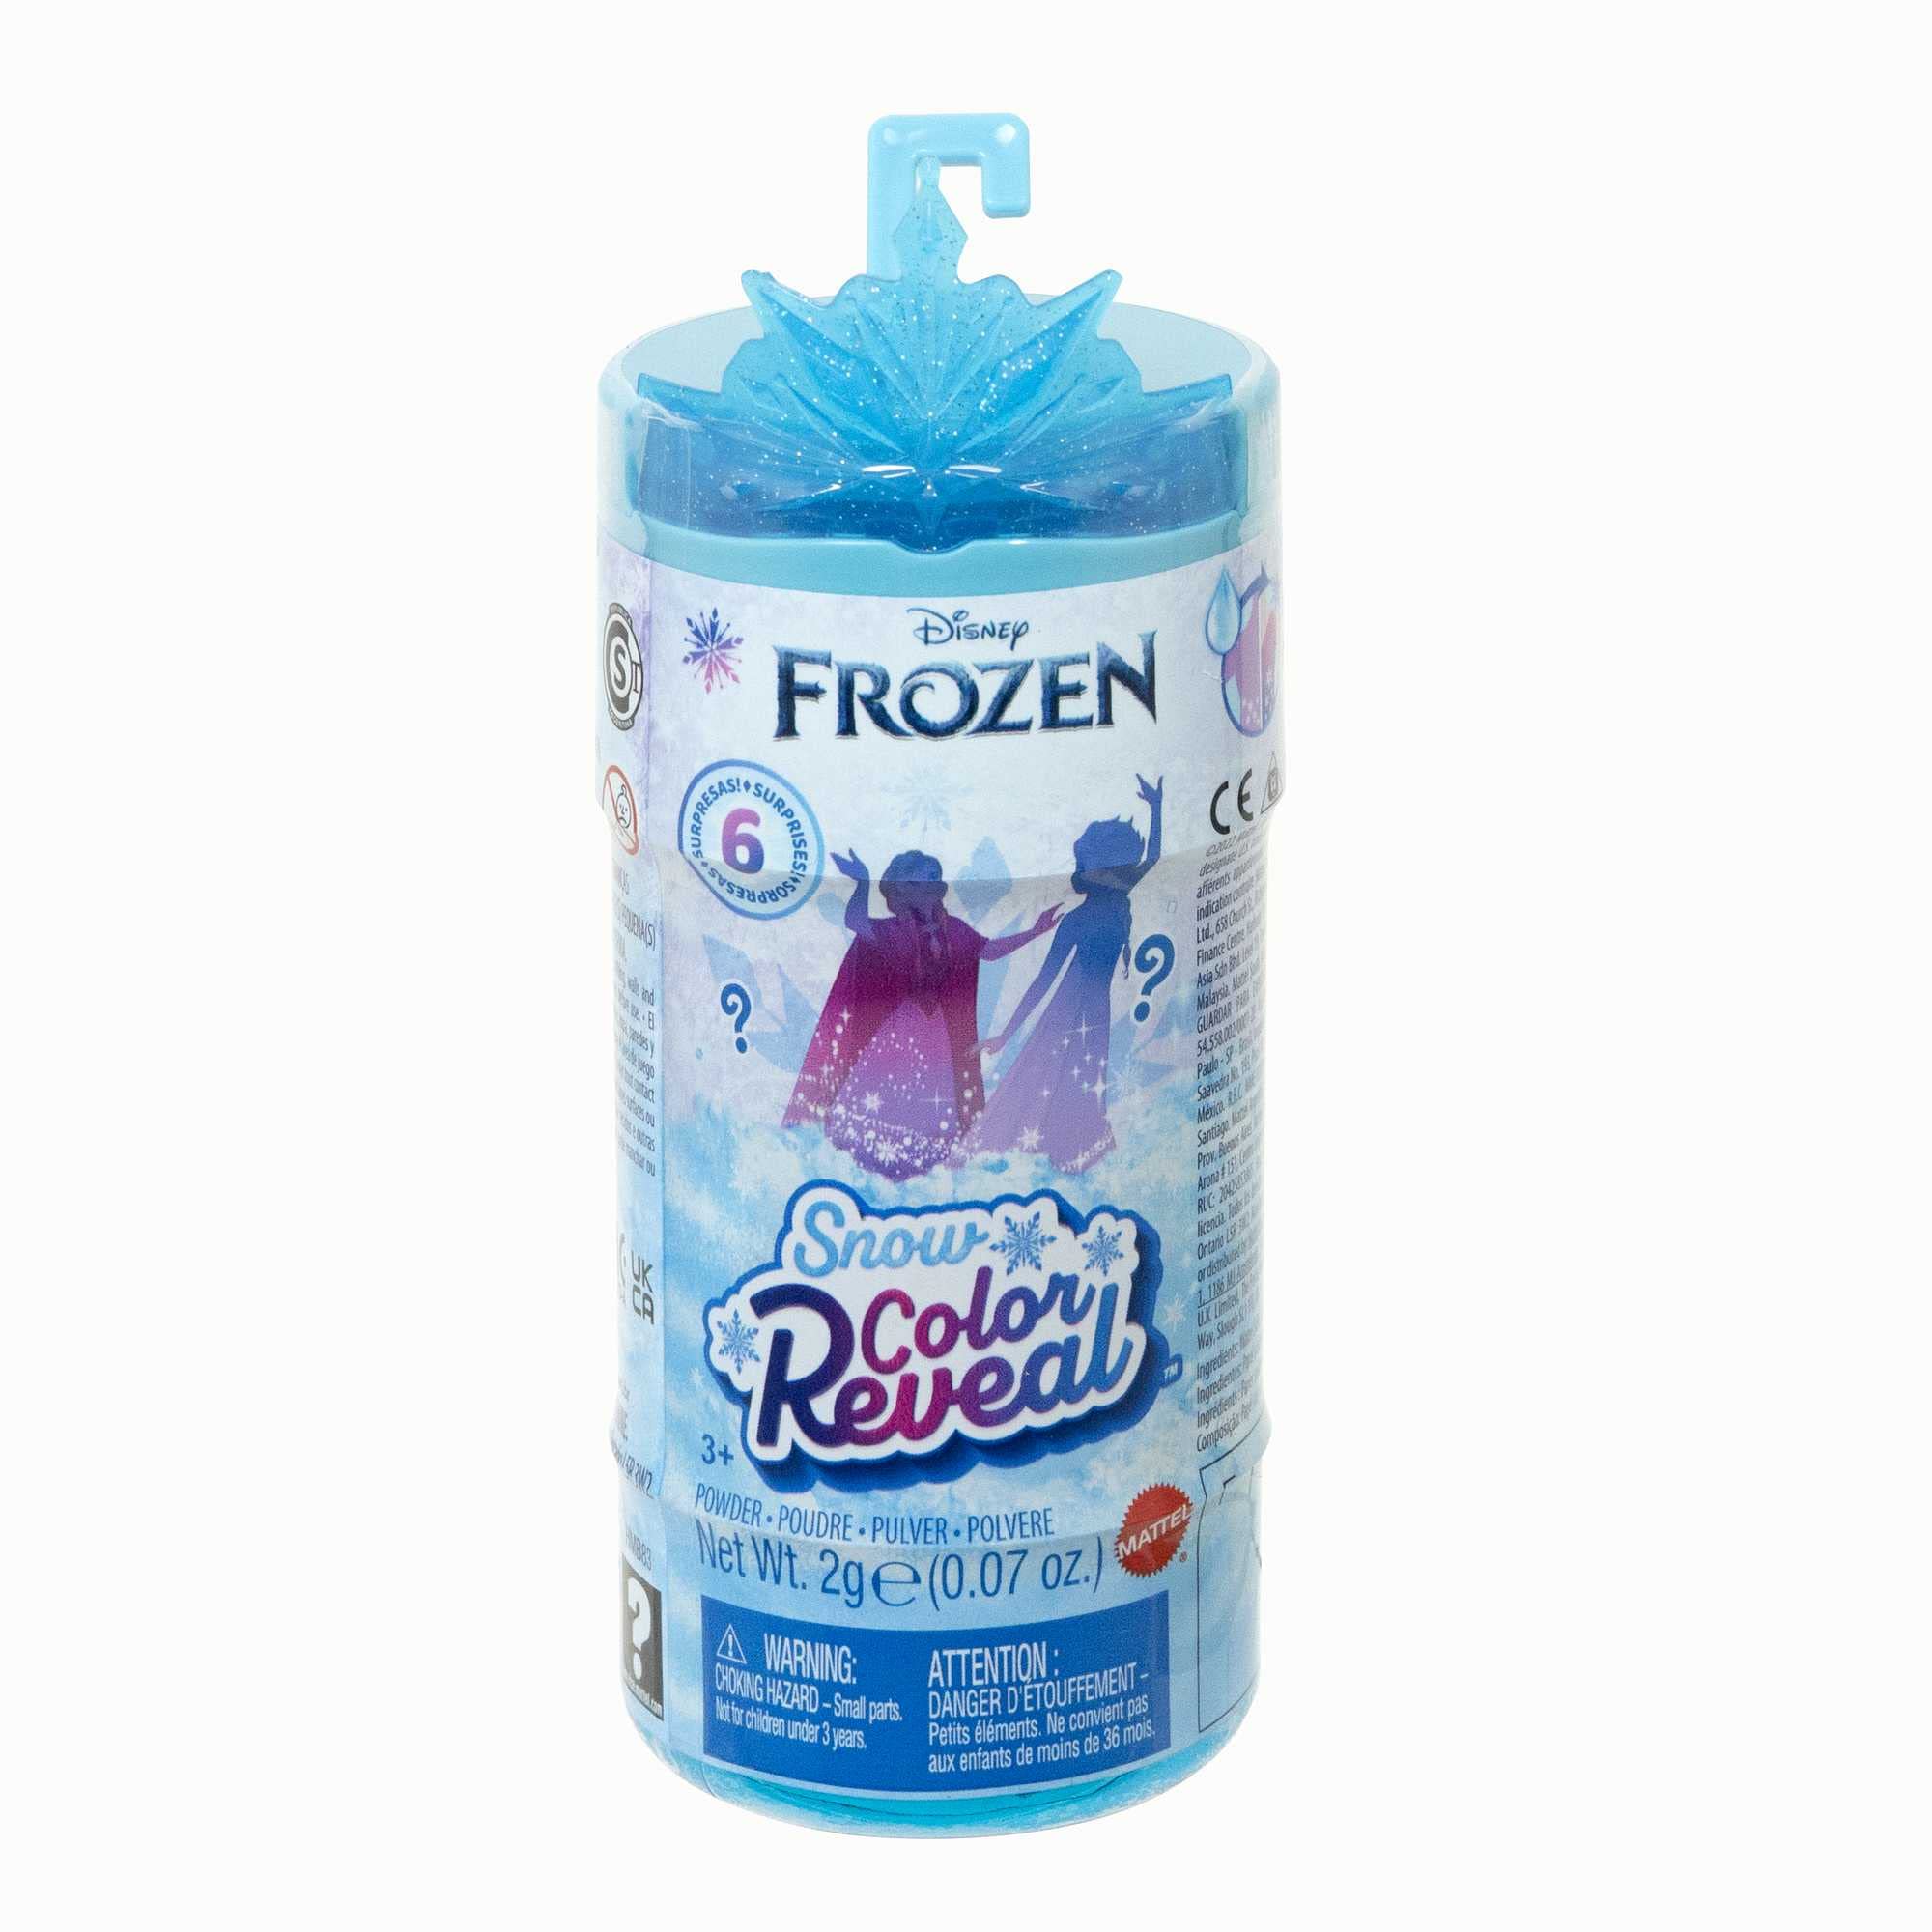 Disney Frozen Snow Color Reveal Small Doll & Accessories, 6 Surprises Include Character Figure Inspired by Disney Movies